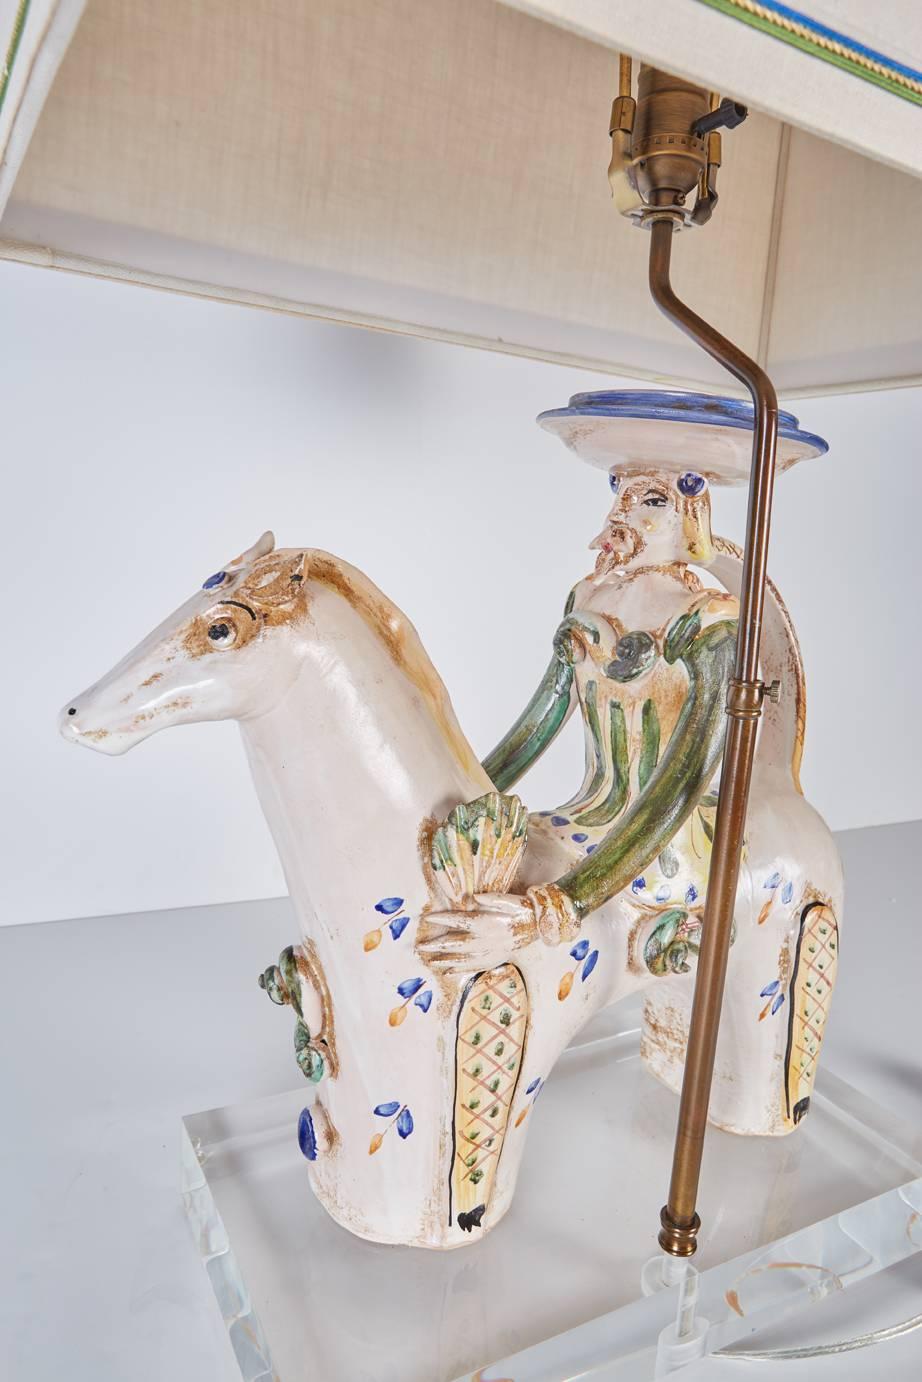 Hand-Crafted Italian Midcentury Ceramic Horse with Rider Now Custom Mounted as a Lamp